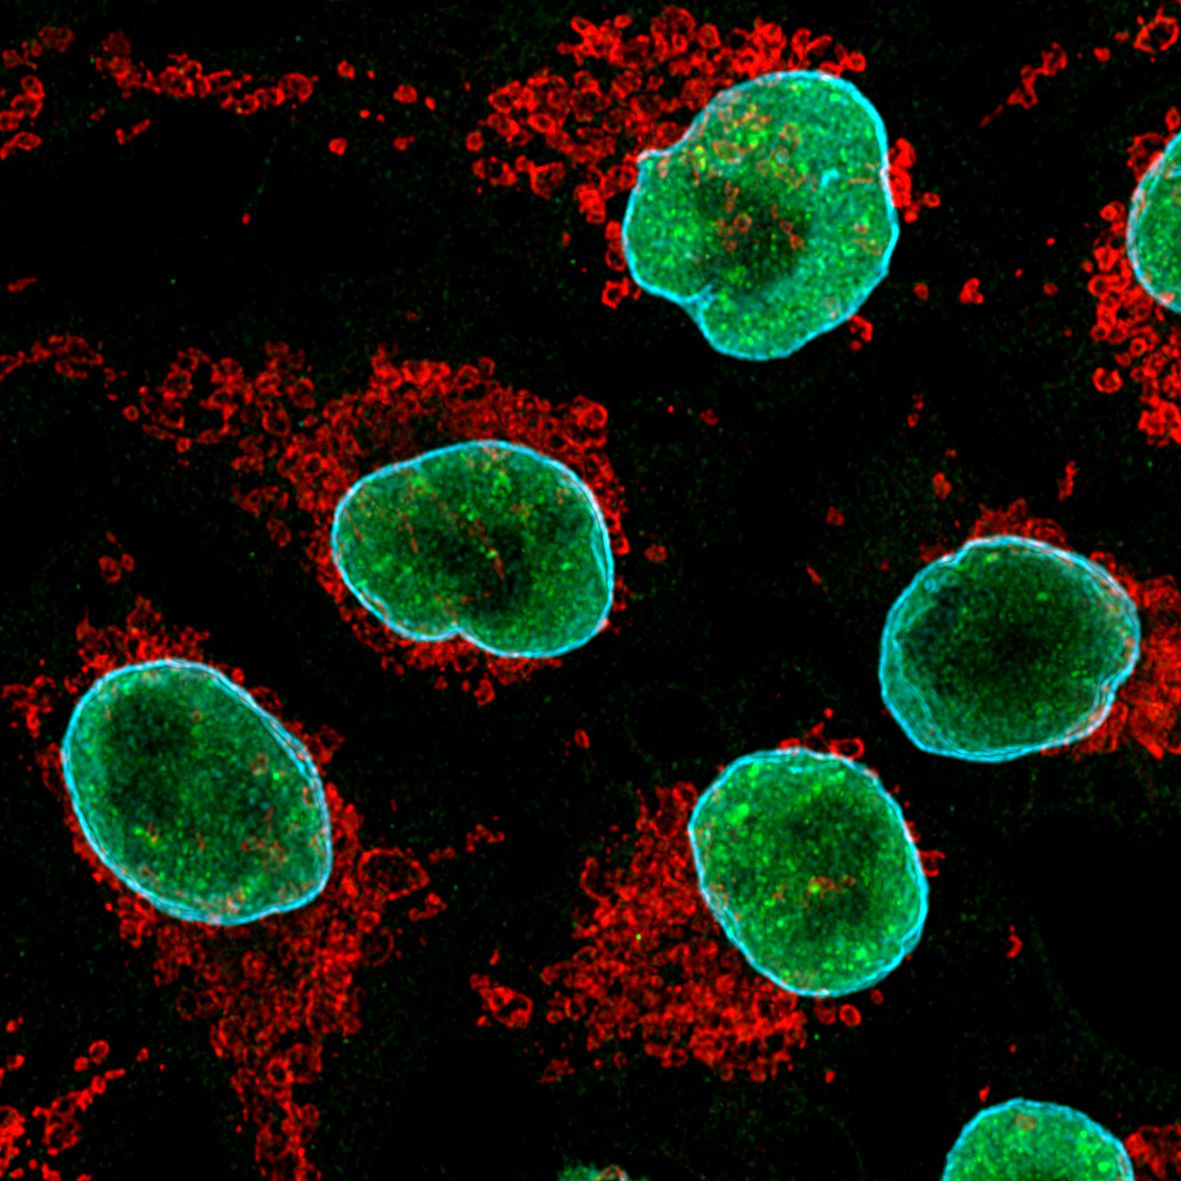 Immunofluorescence of HeLa: PFA-fixed HeLa cells were stained with anti-TDP-43 (10782-2-AP) labeled with FlexAble CoraLite® 488 Kit (KFA001, green), anti-Tom20 (11802-1-AP) labeled with FlexAble CoraLite® Plus 550 Kit (KFA002, red) and anti-Lamin B1 (12987-1-AP) labeled with FlexAble CoraLite® Plus 650 Kit (KFA003, cyan).​ Confocal images were acquired with a 100x oil objective and post-processed. Images were recorded at the Core Facility Bioimaging at the Biomedical Center, LMU Munich.